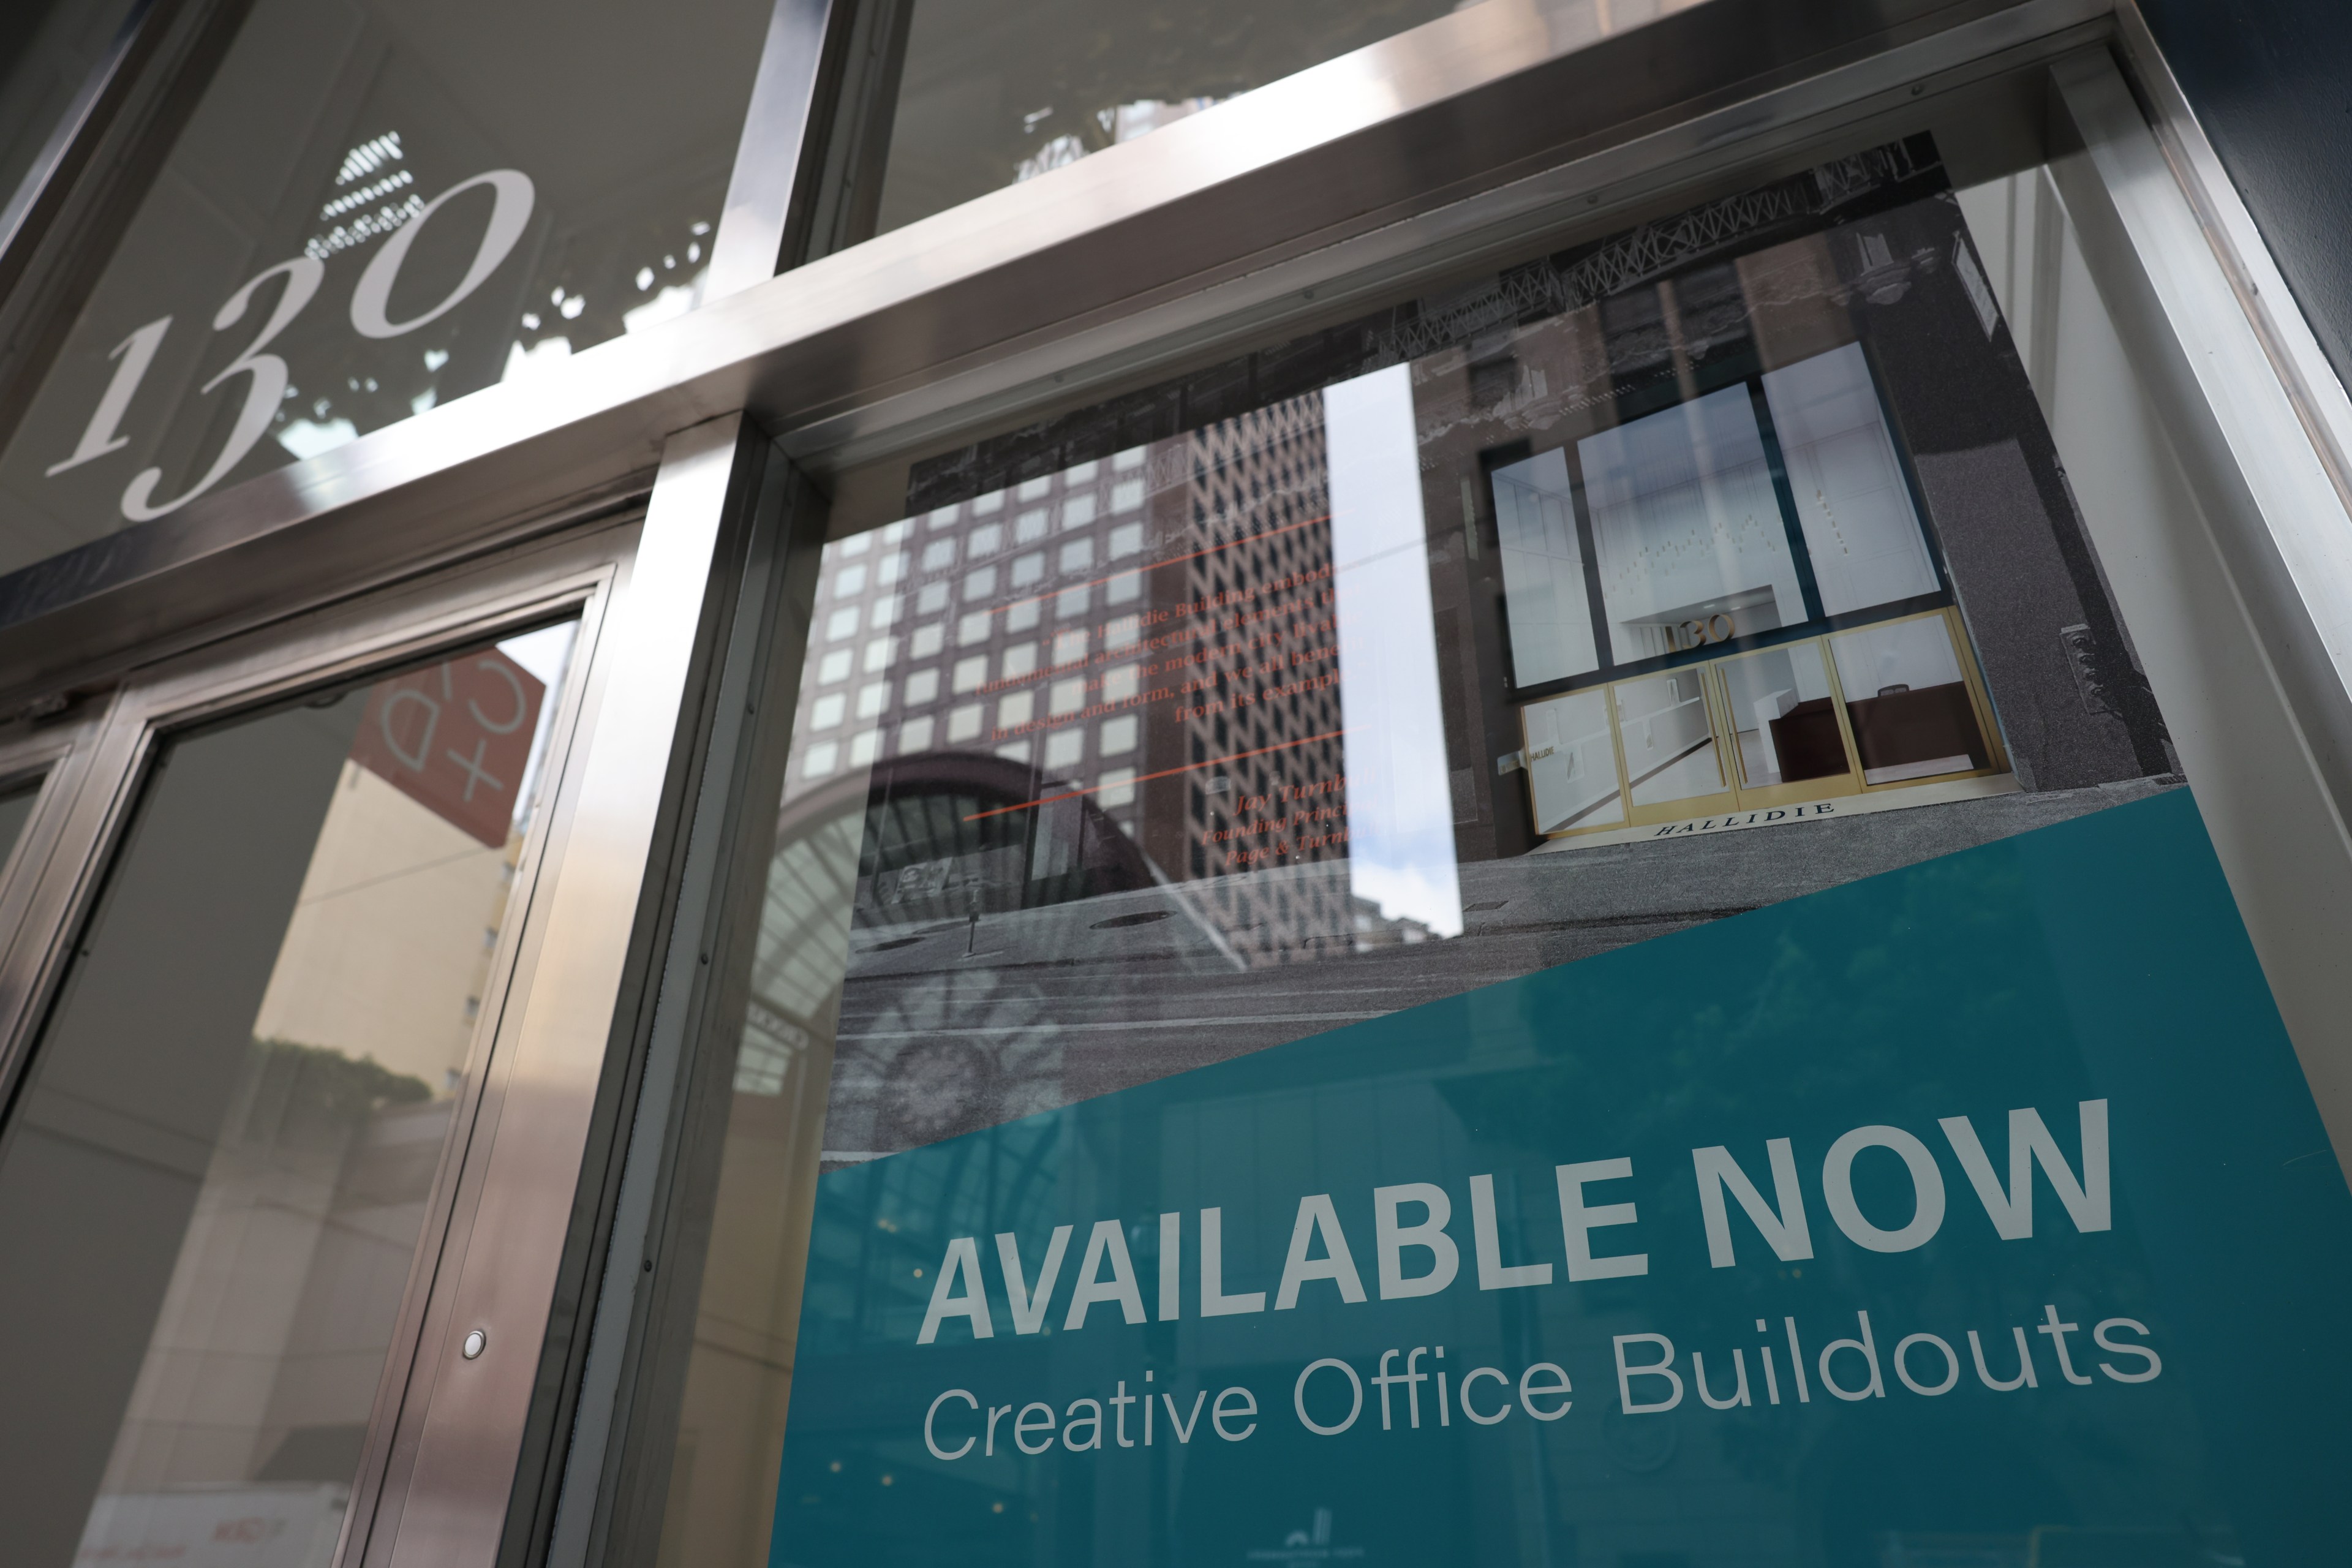 A storefront with &quot;AVAILABLE NOW Creative Office Buildouts&quot; sign, reflecting city buildings.